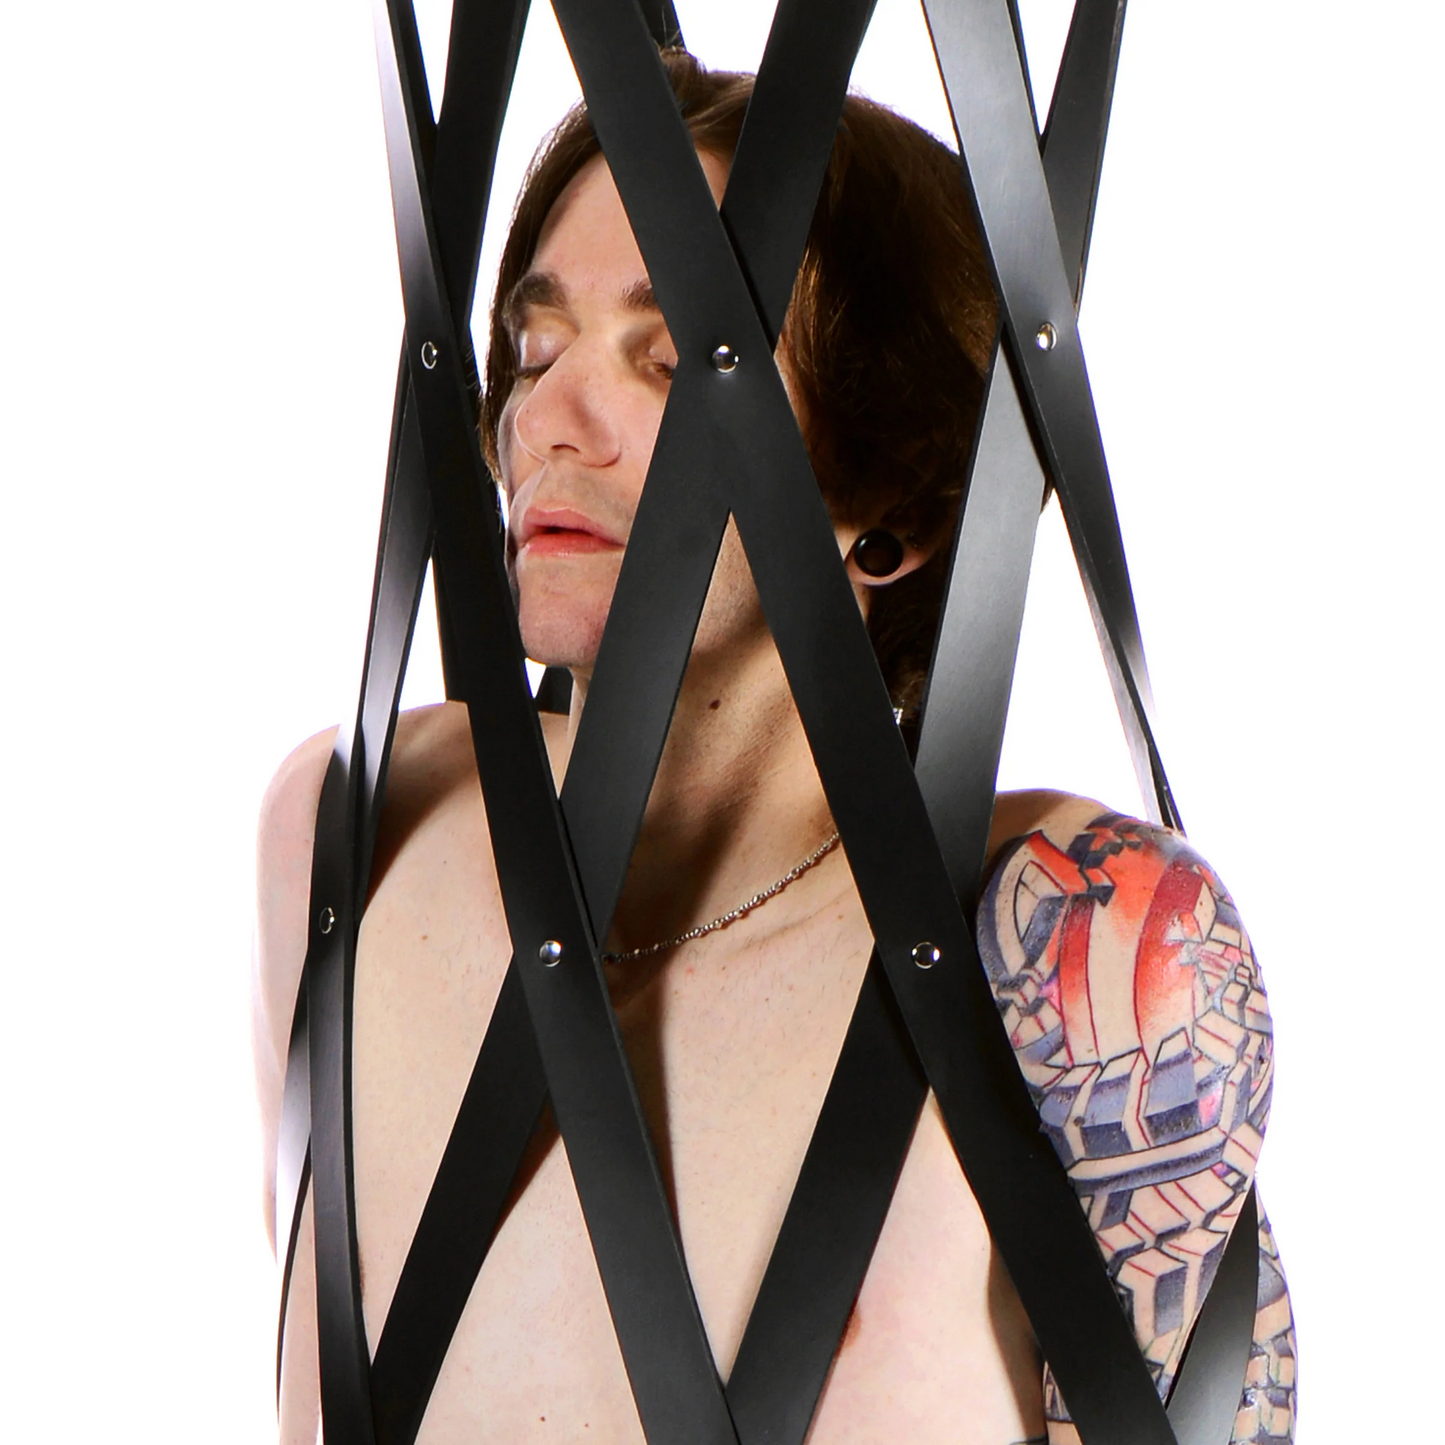 Master Series Hanging Rubber Strap Cage - XOXTOYS